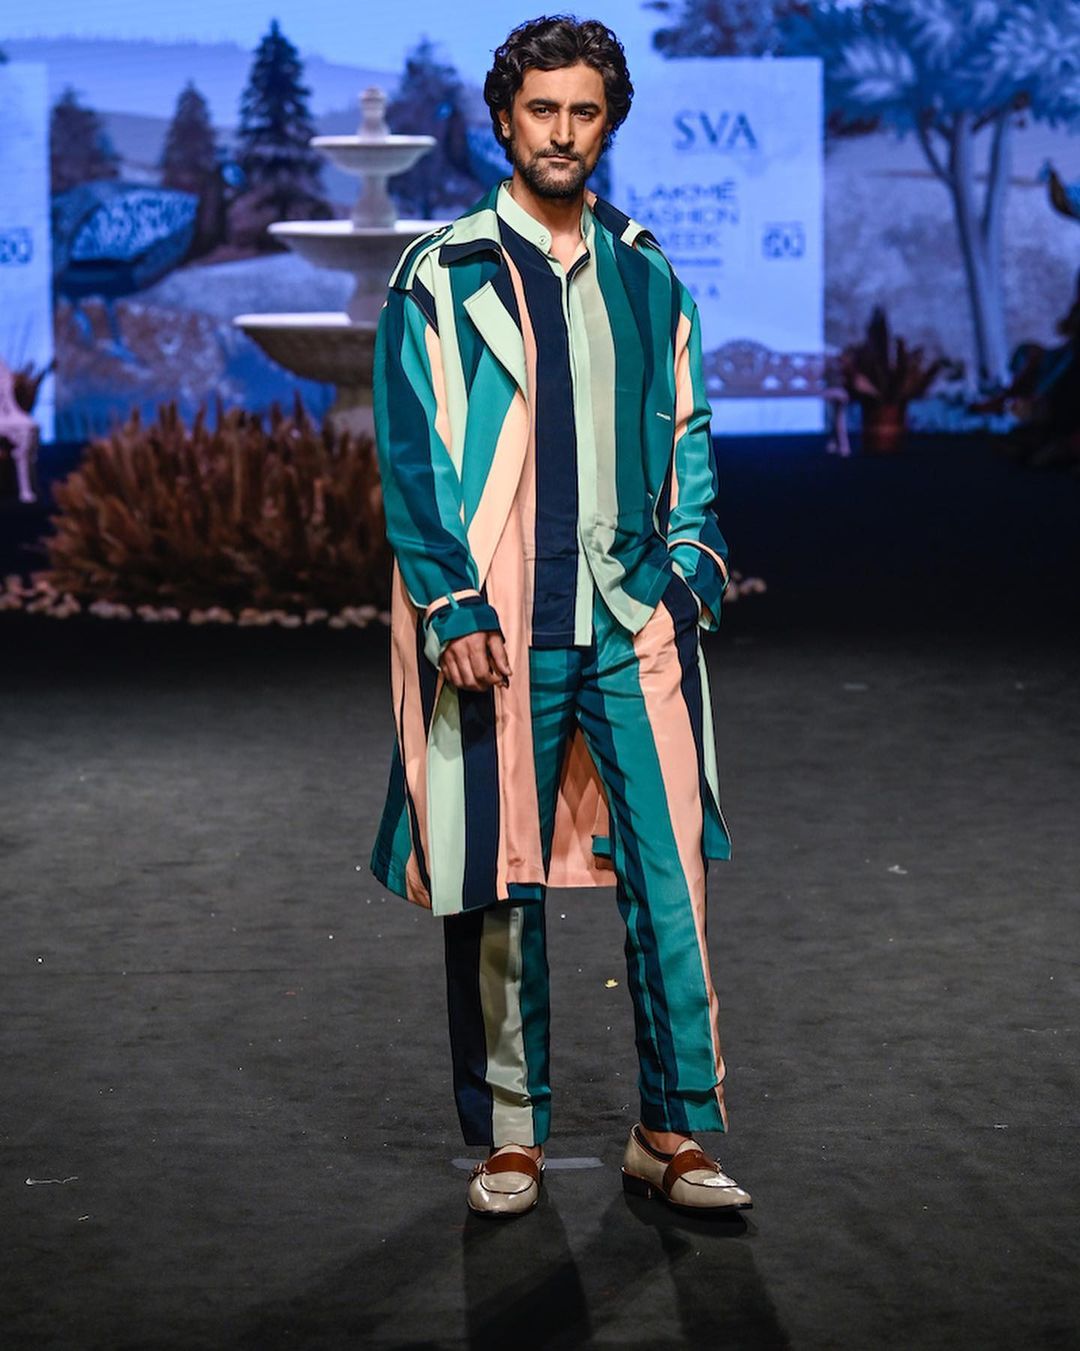 Lakme Fashion Week Bollywood Celebrities Spotted At The Runway - Kunal Kapoor's Stunning Look In multiColor Stipped Three-Piece Set